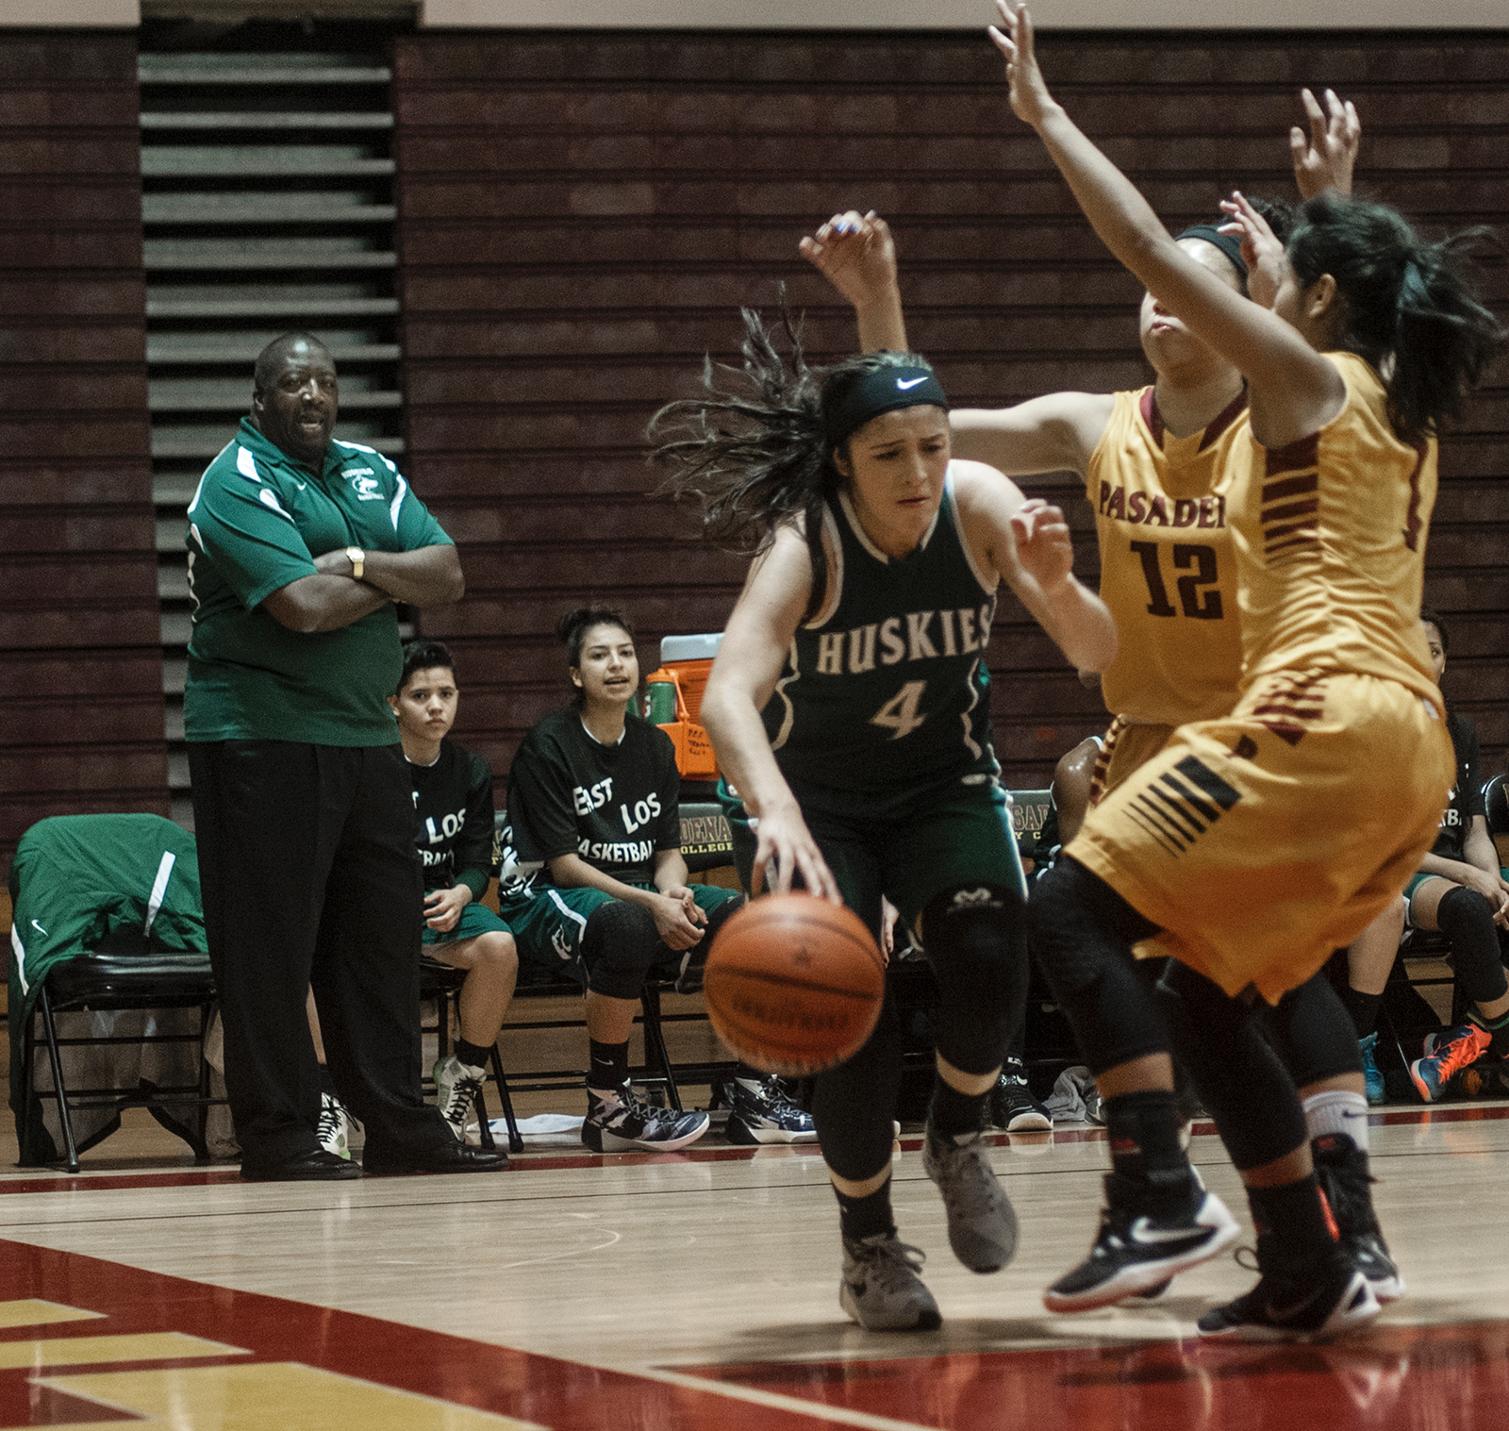 East Los Angeles College freshman guard Allissa Gomez drives near the baseline around two Pasadena City College defenders in a 51-47 Husky win against the Lancers Jan. 28, 2015. (Photo by Tadzio Garcia, Photojournalist)